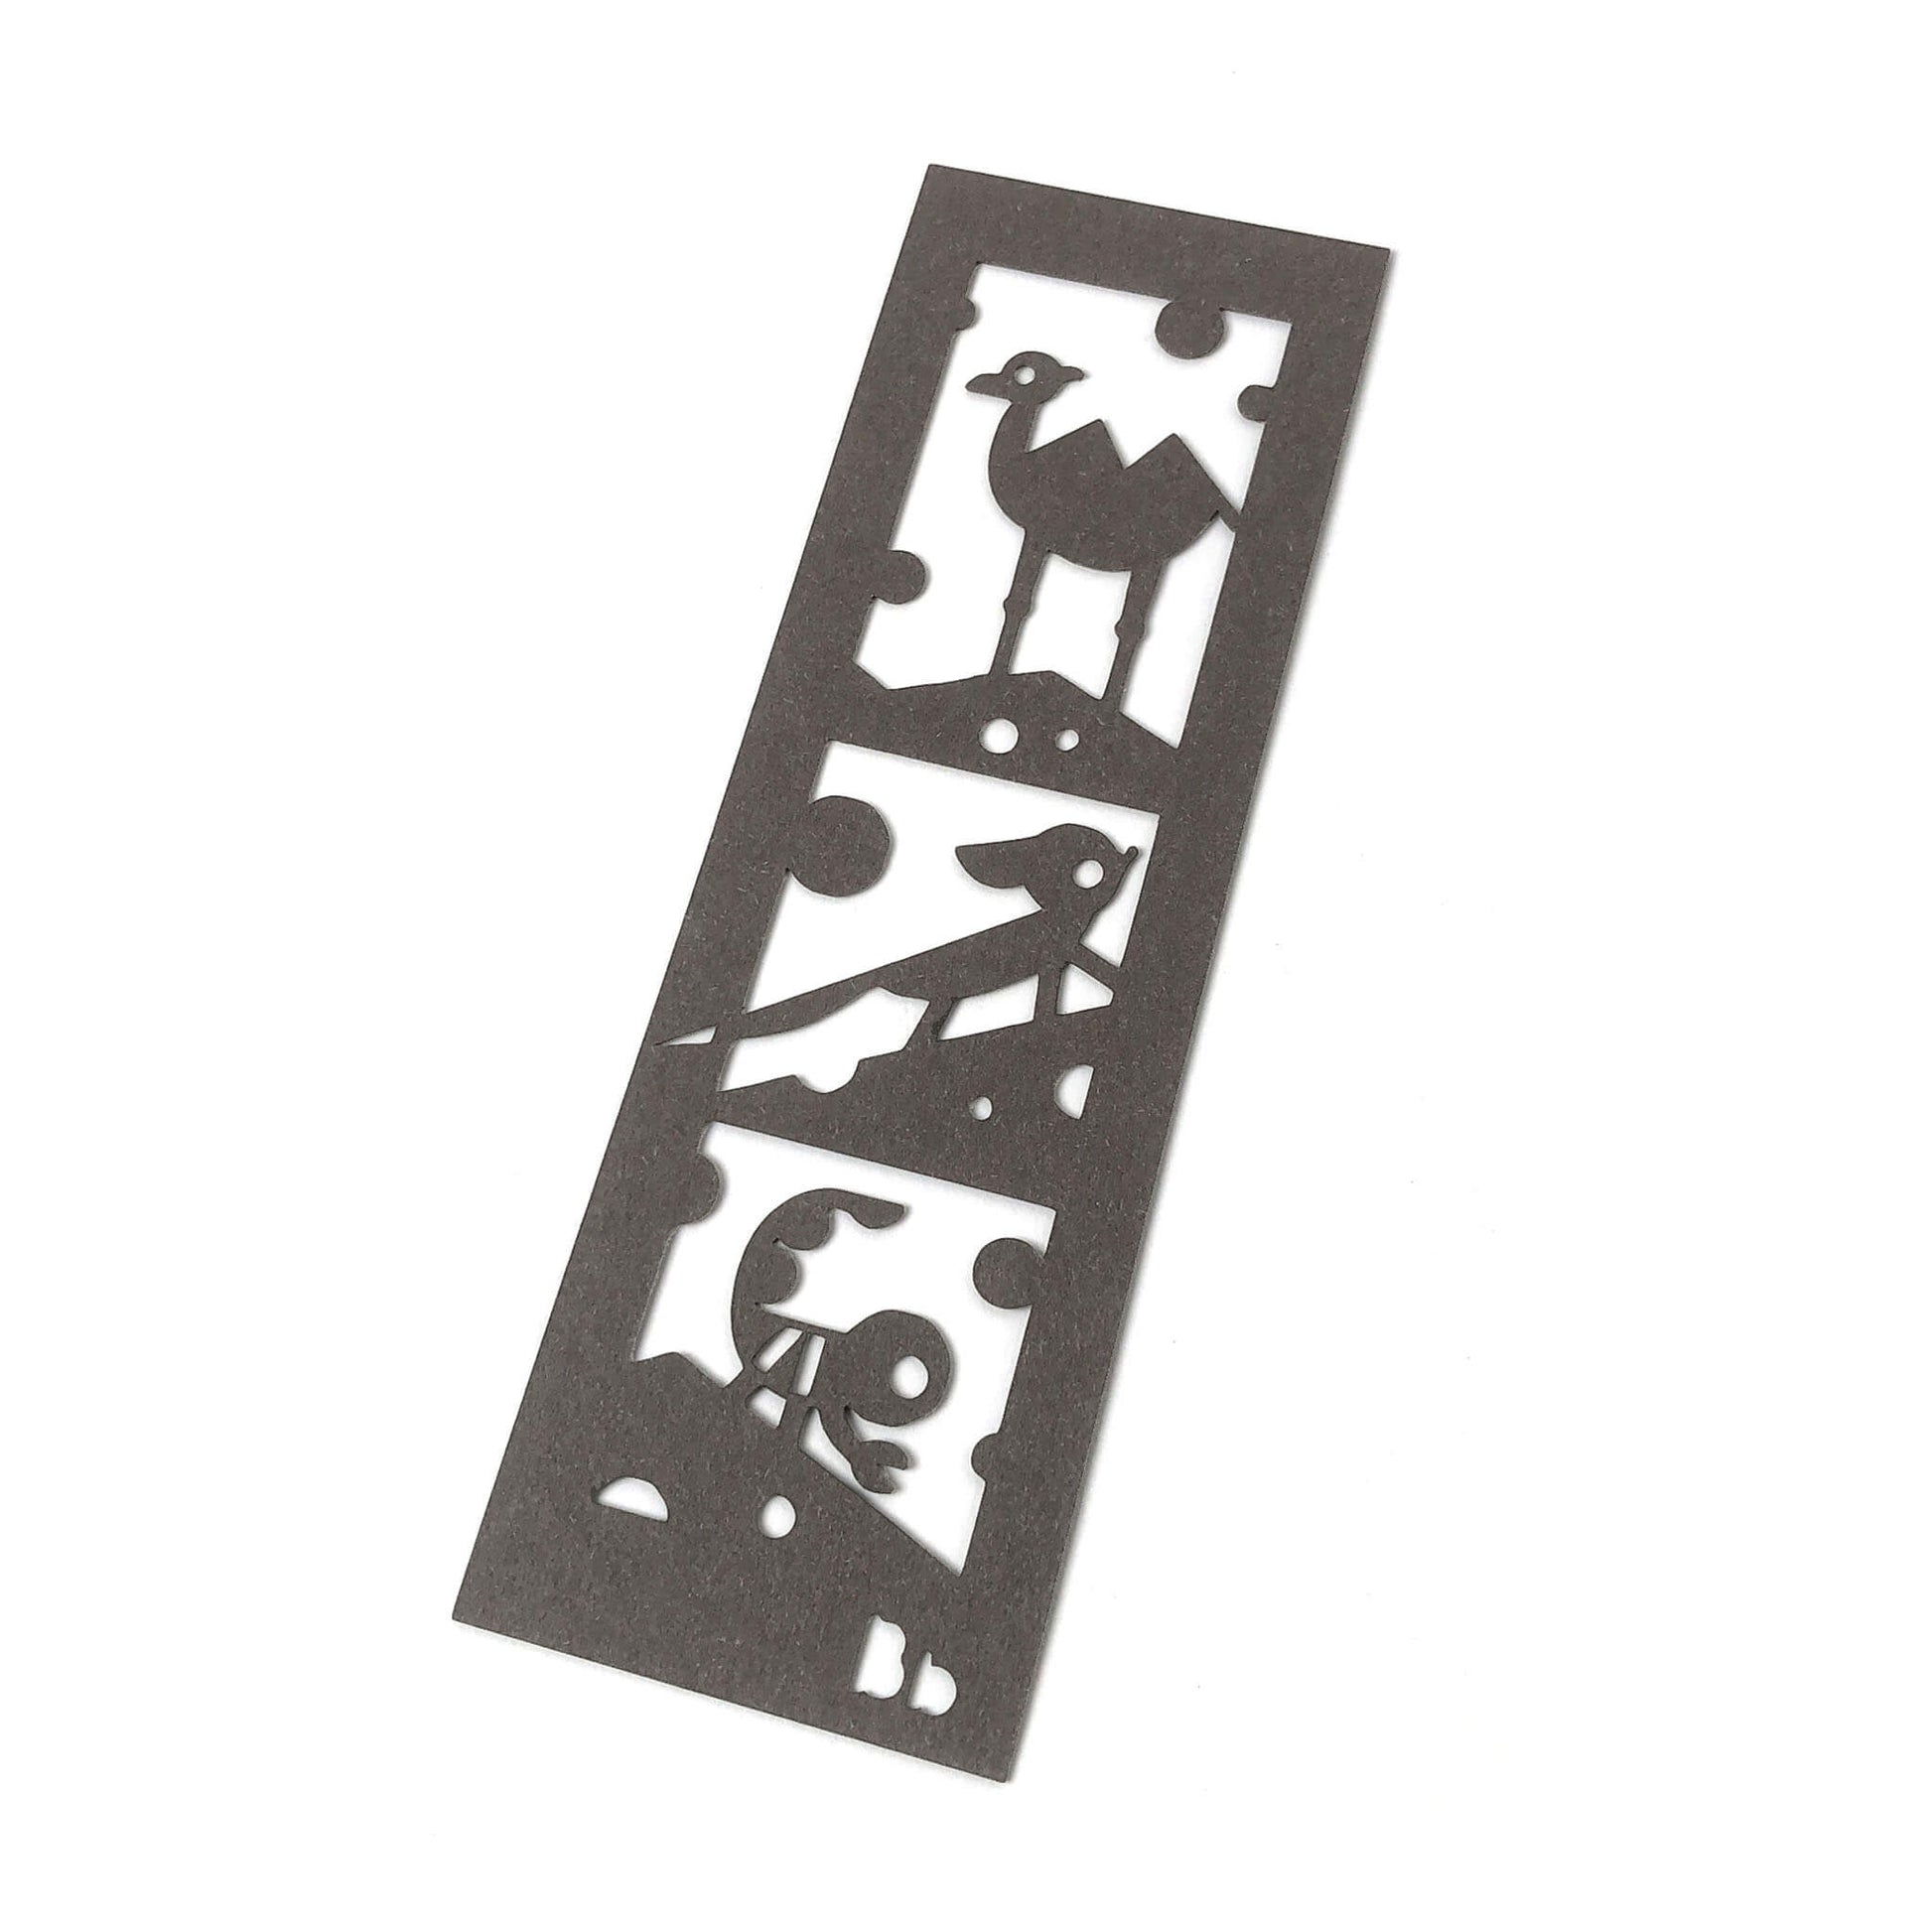 A dark brown paper bookmark with cut-outs of a camel, fennec fox, scorpion and Bb on a white background.